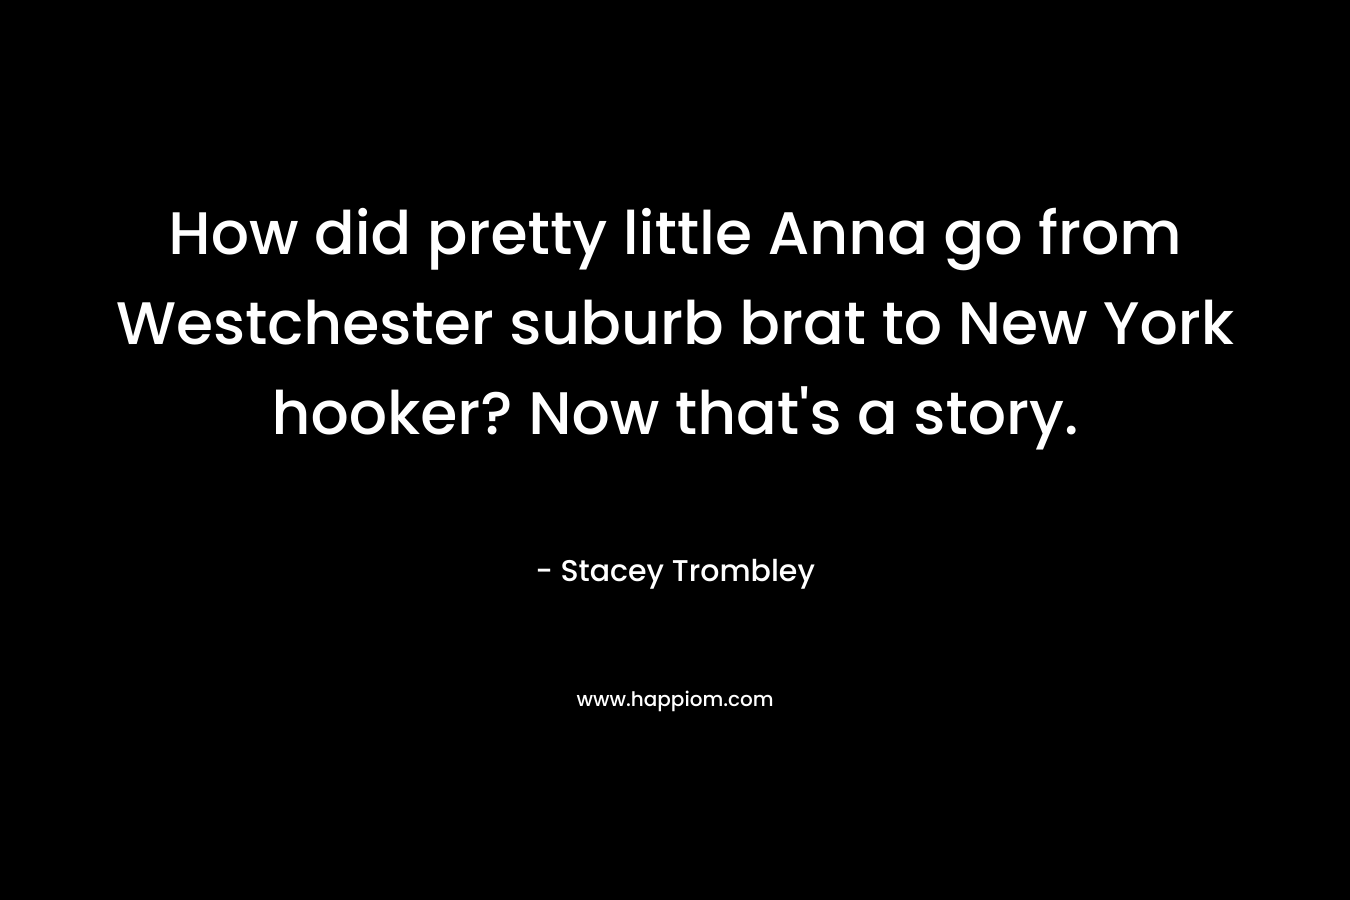 How did pretty little Anna go from Westchester suburb brat to New York hooker? Now that’s a story. – Stacey Trombley